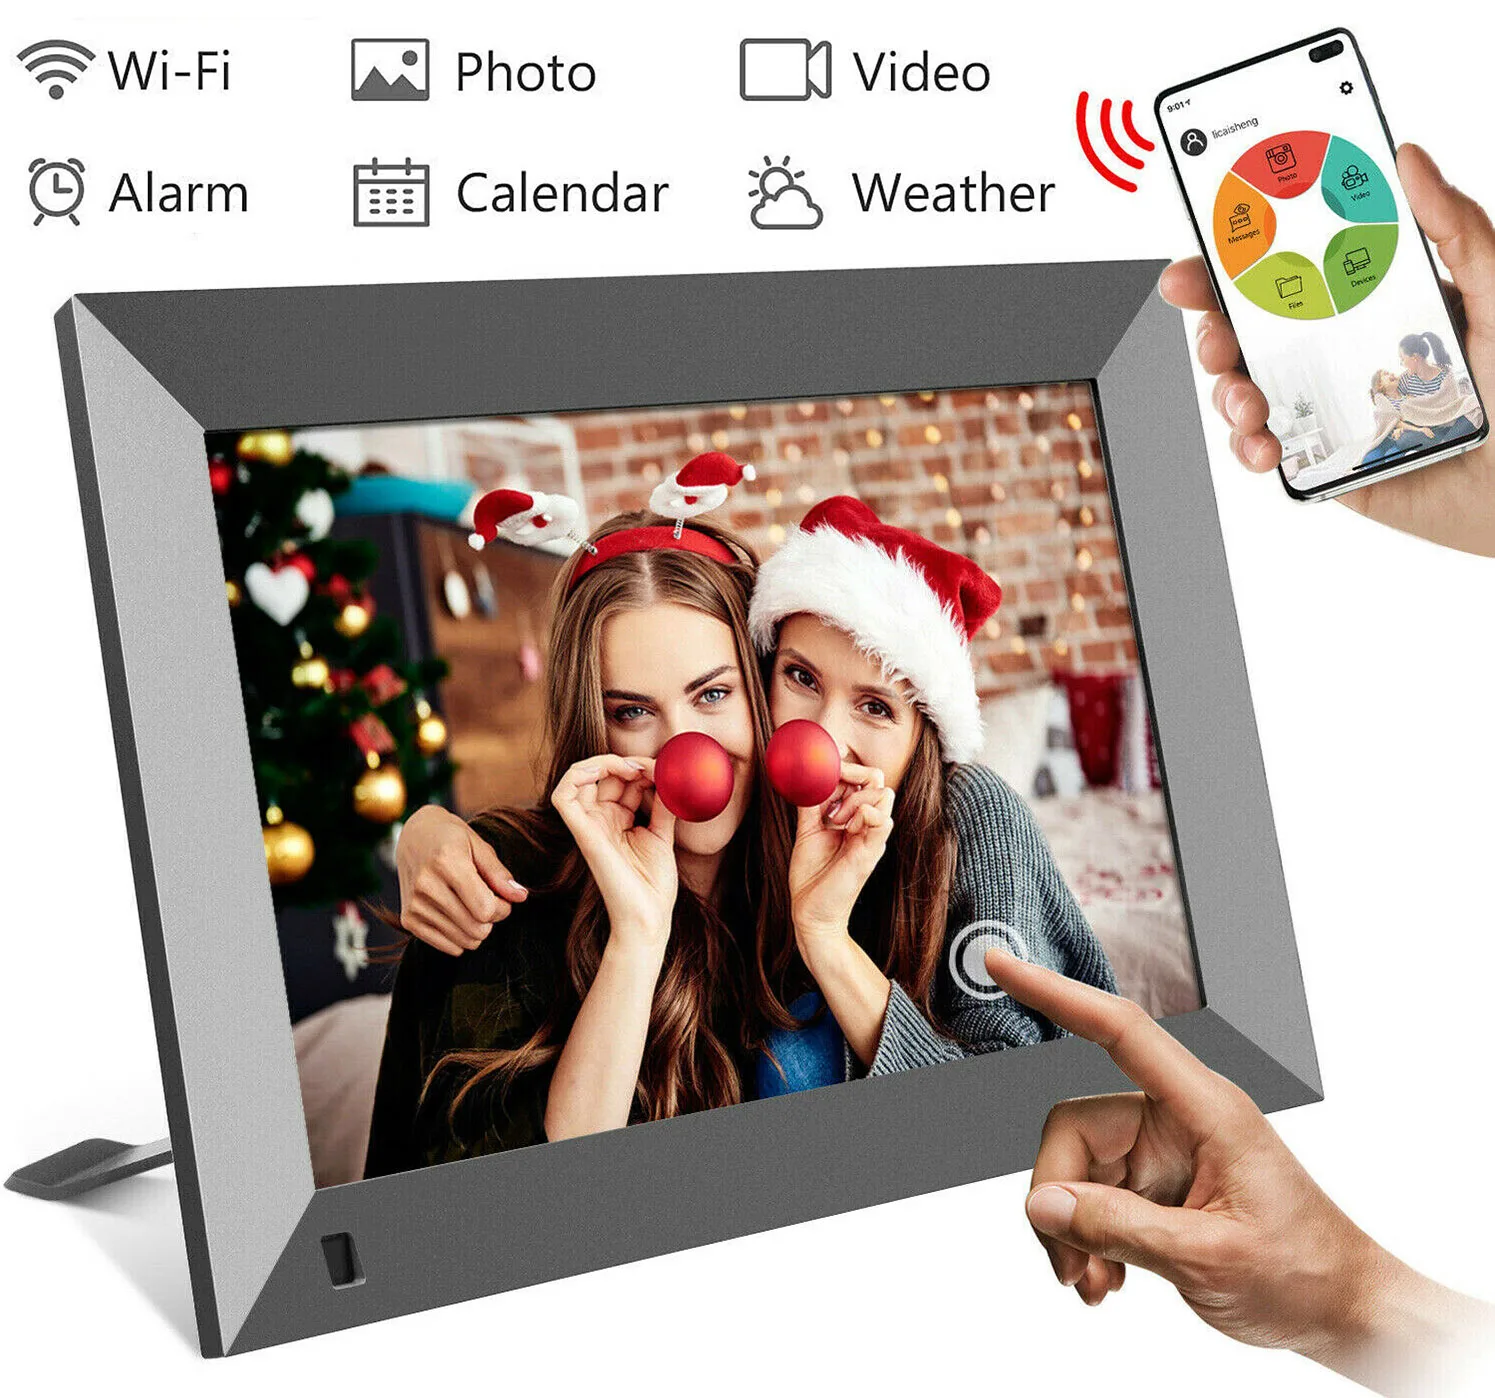 

large stock Frameo app 10.1 inch IPS Display 16GB Storage Auto-Rotate Share Photos via App Touch Digital Picture Frame WiFi